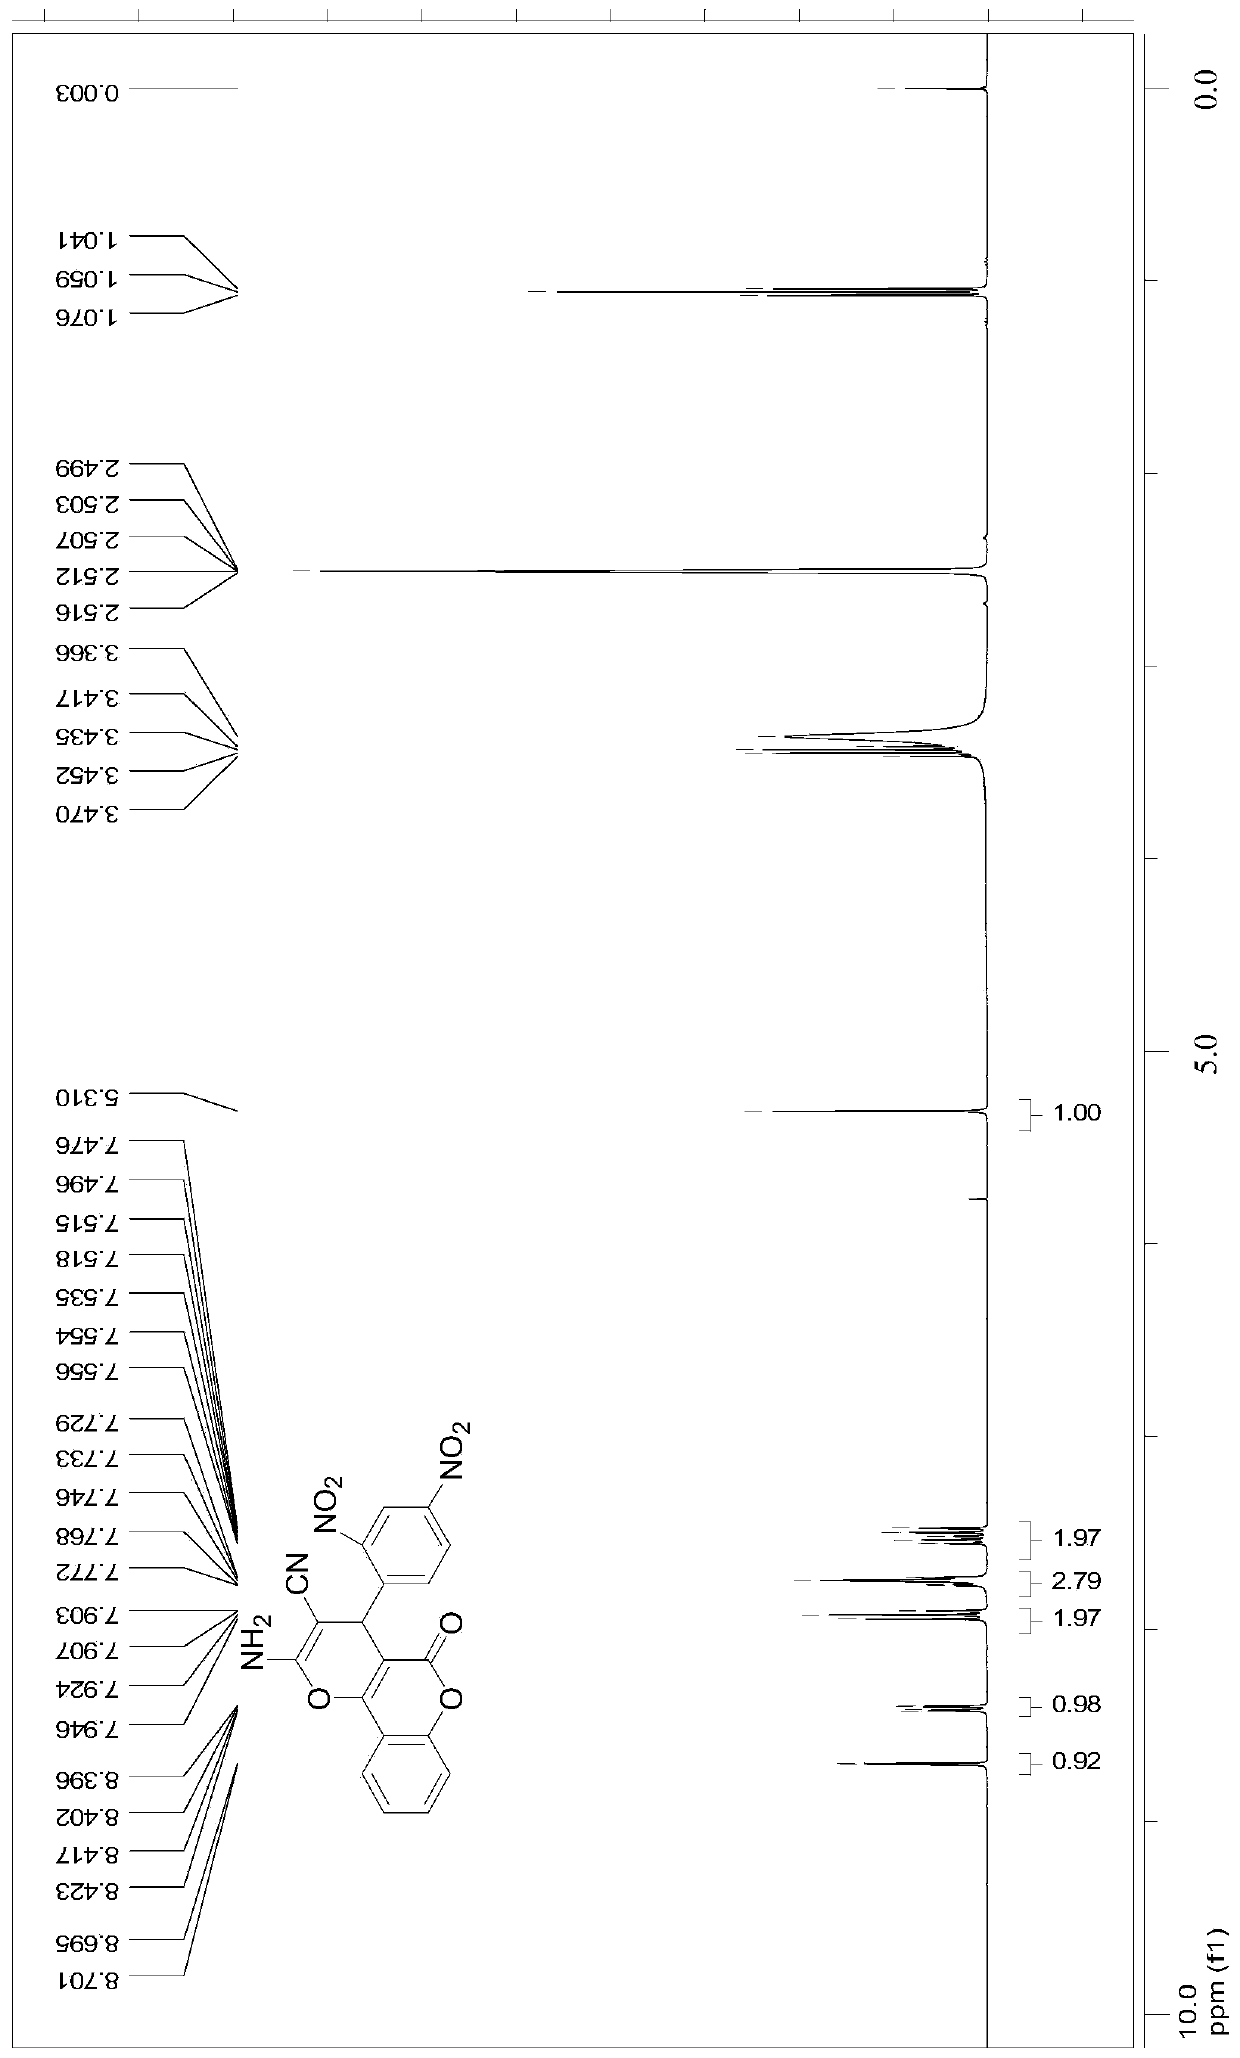 Pyrone compounds and applications of compounds in resisting pseudomonas aeruginosa biofilm